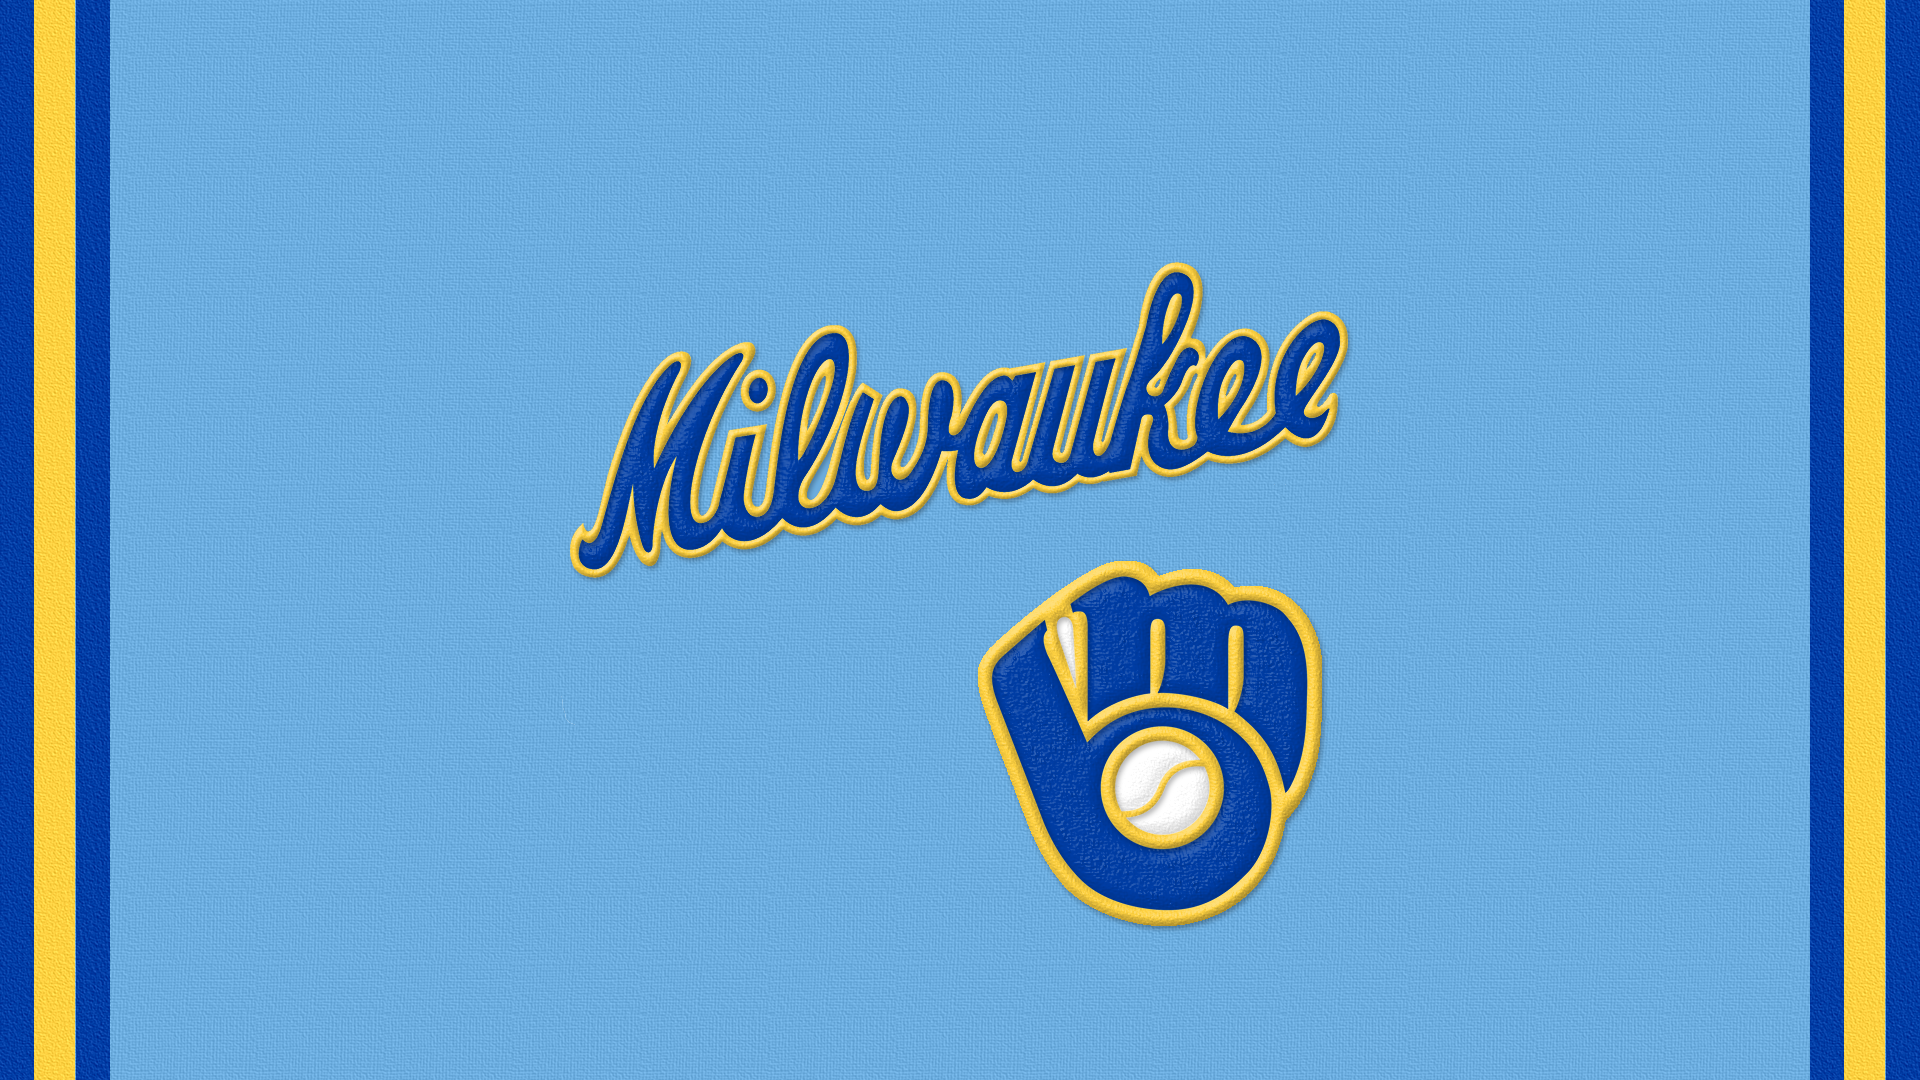 Retro Brewers desktop wallpaper, 1920x1080 1366x768 and other Brewers wallpaper also on the site!